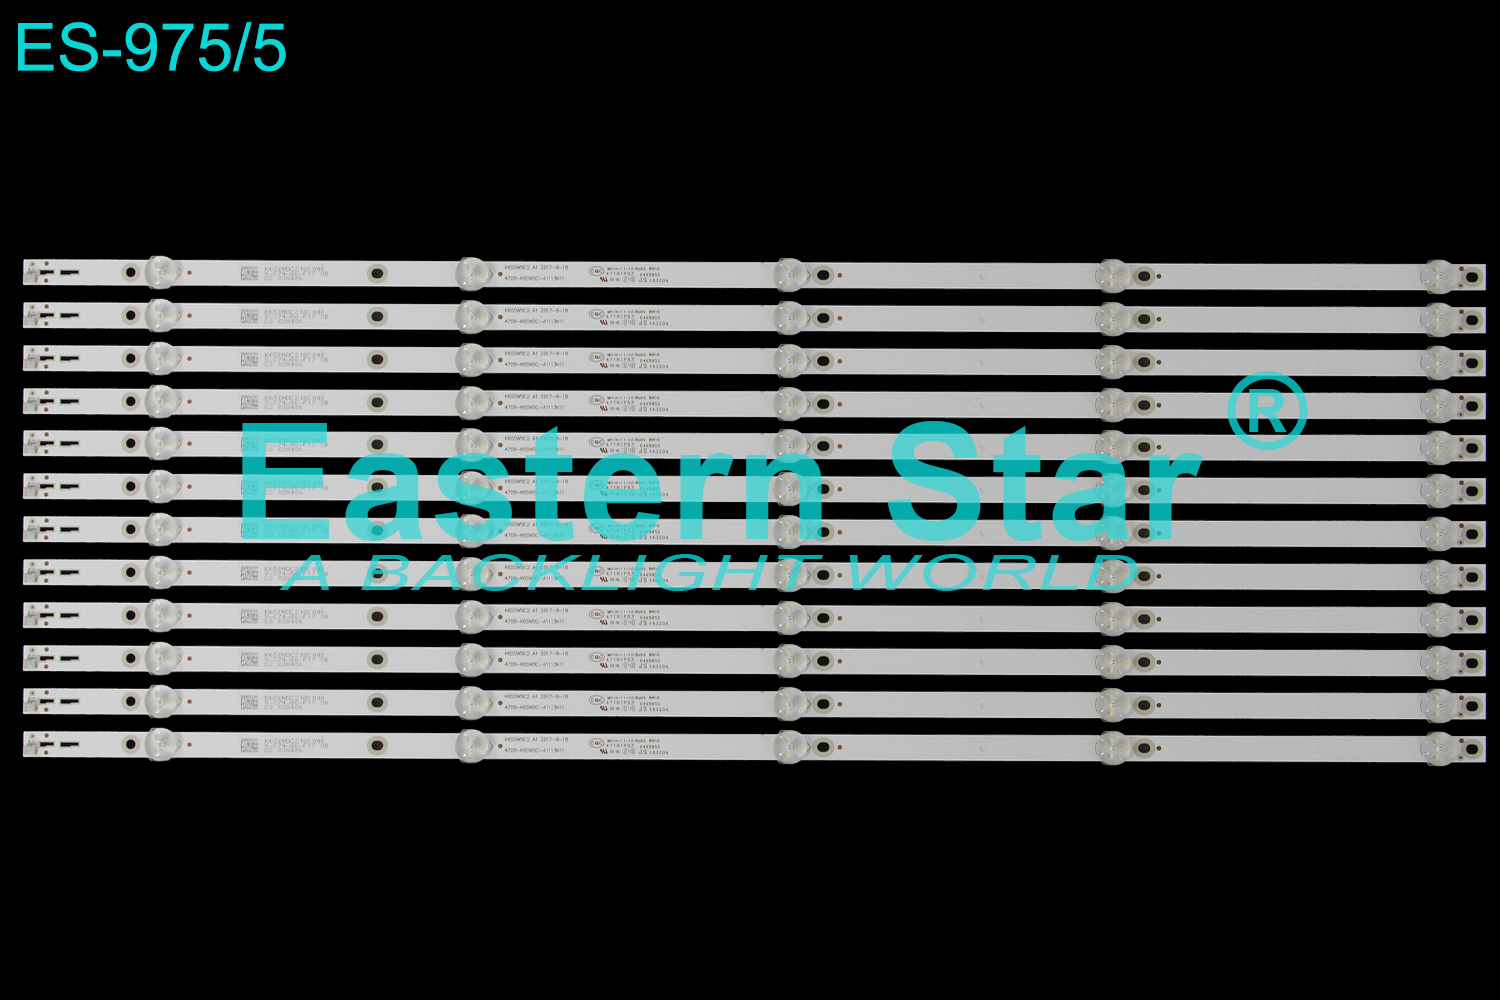 ES-975 LED TV Backlight use for 65" Philips  65PUF6263/T3 / Toshiba 65U5855EC K650WDC2 A1 2017-8-18  4708-K65WDC-A1113N11  4708-K65WDC-A1113N21 LED STRIP(12)